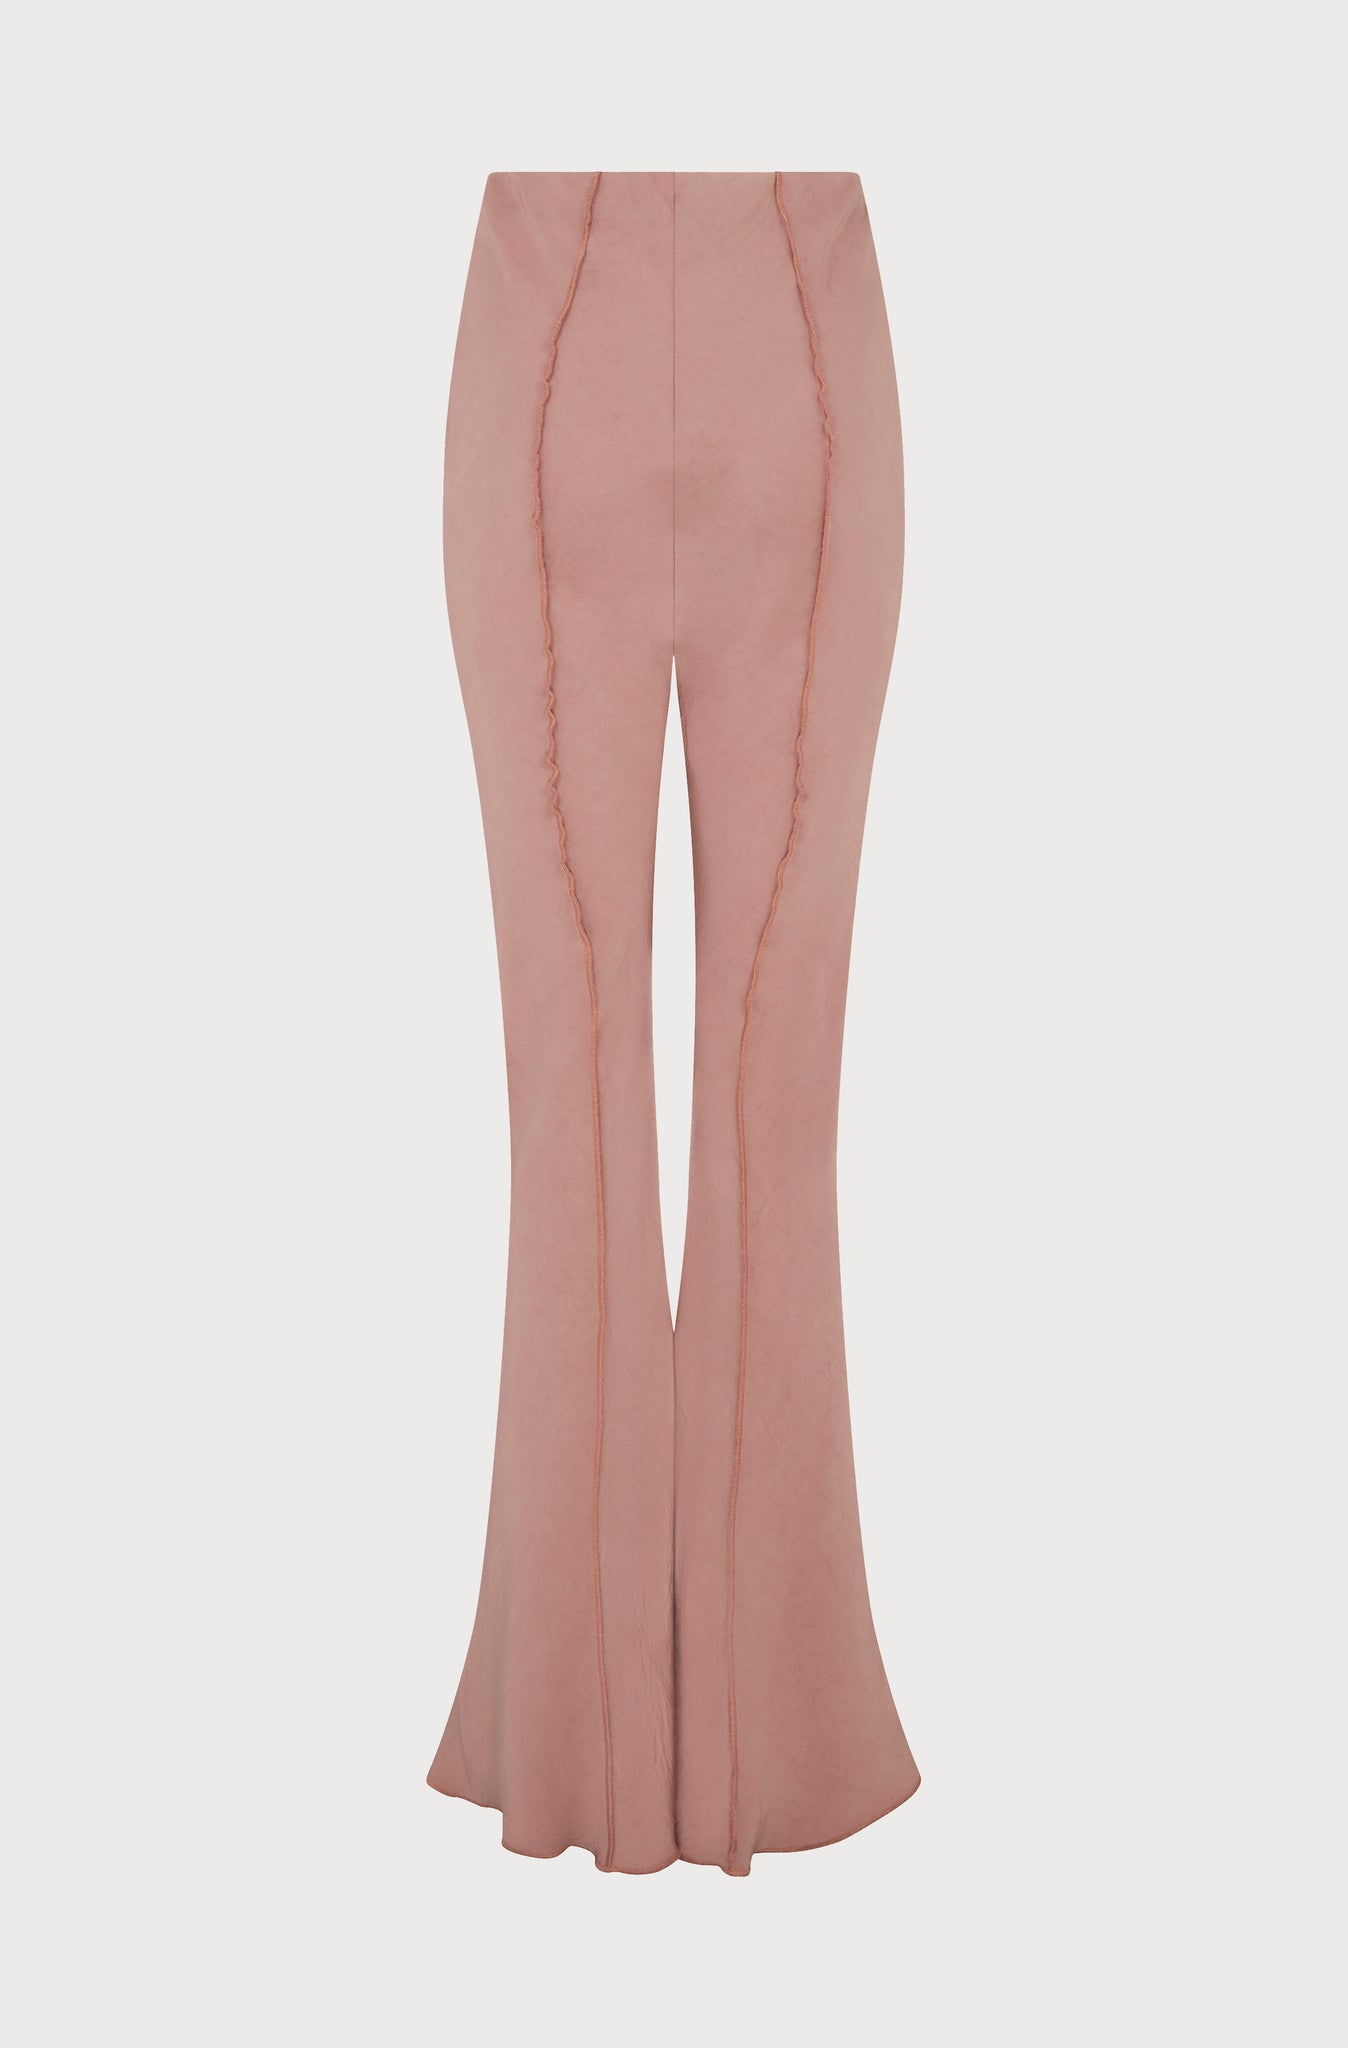 BABYLOCK FLARED TROUSERS - PINK CREPE